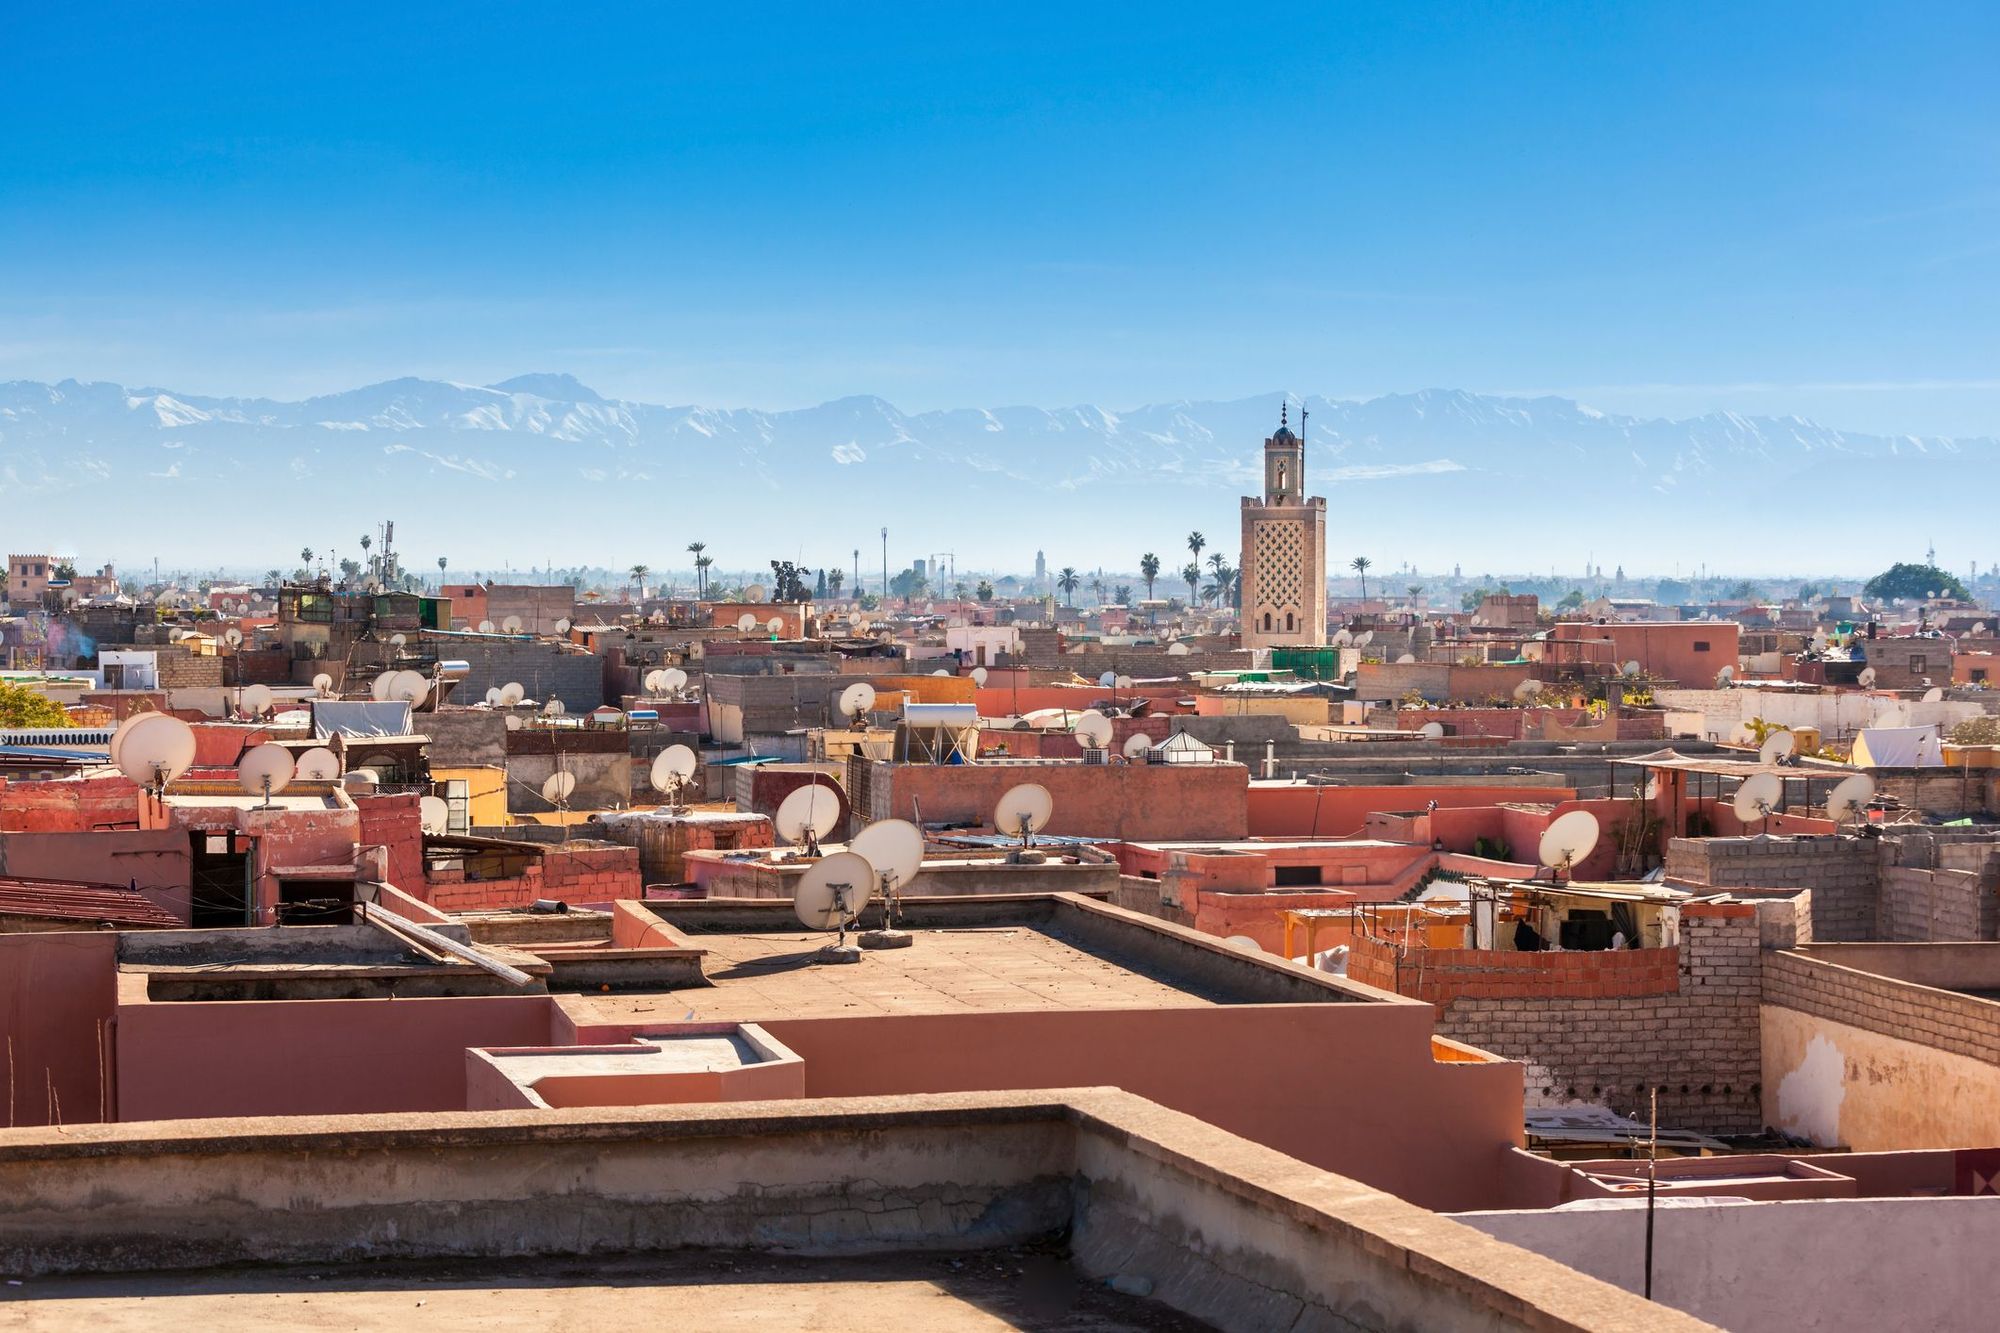 An aerial view of Marrakech, with the Atlas Mountains in the background, taken from a roof terrace.